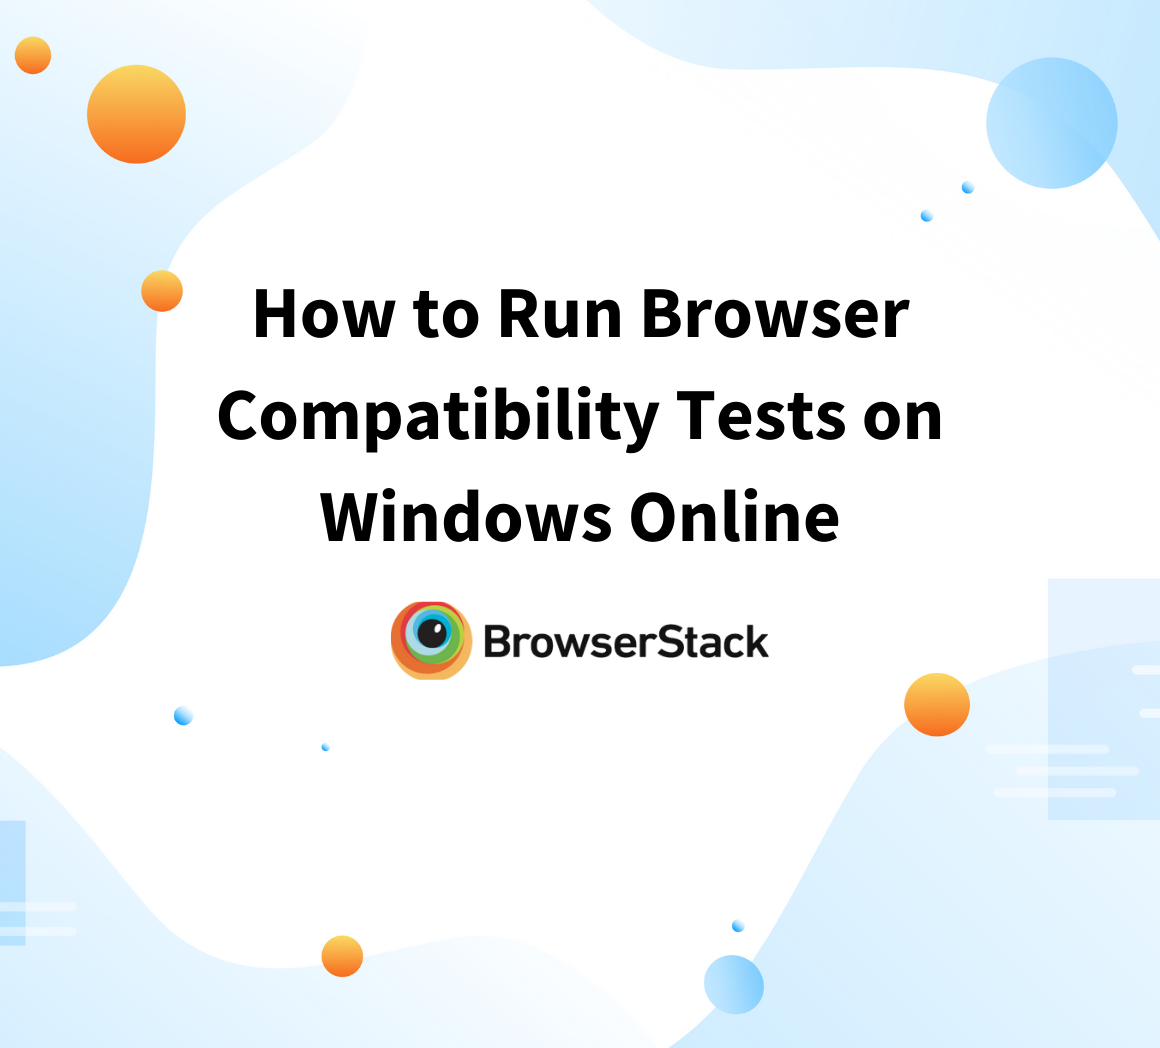 How to Run Browser Compatibility Tests on Windows Online